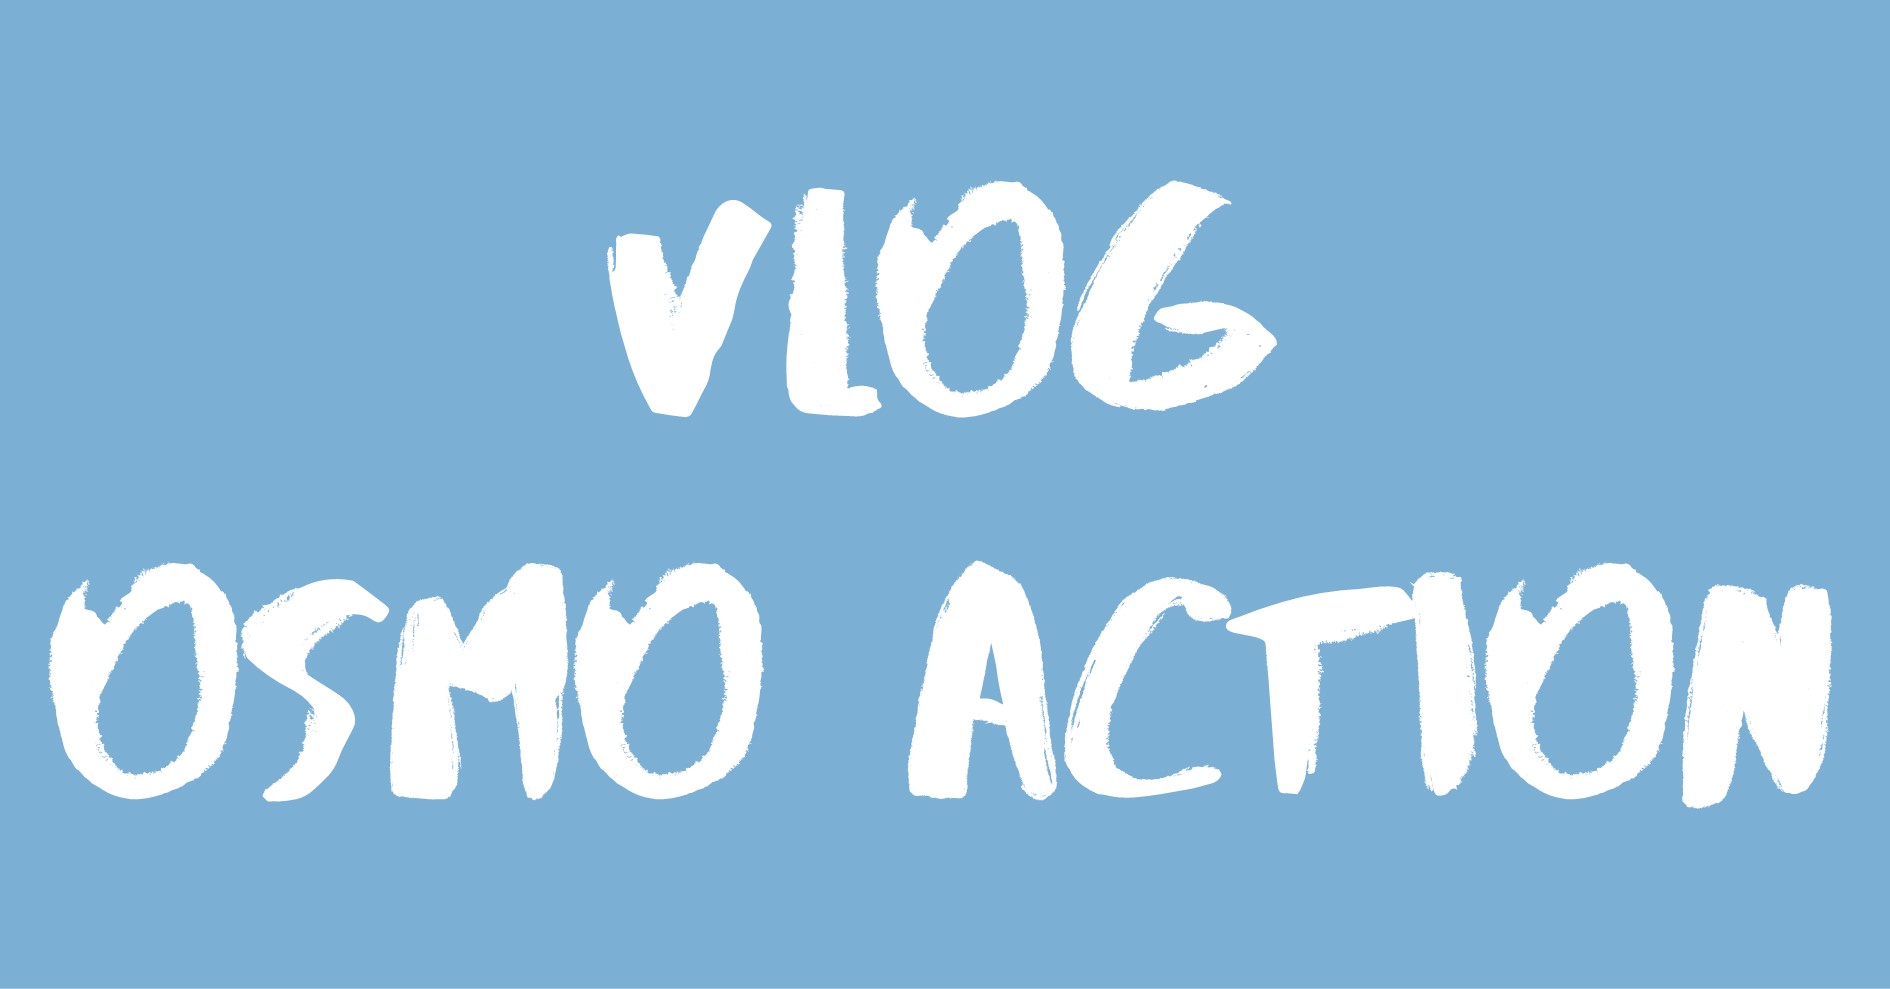 Vlog OSMO Action